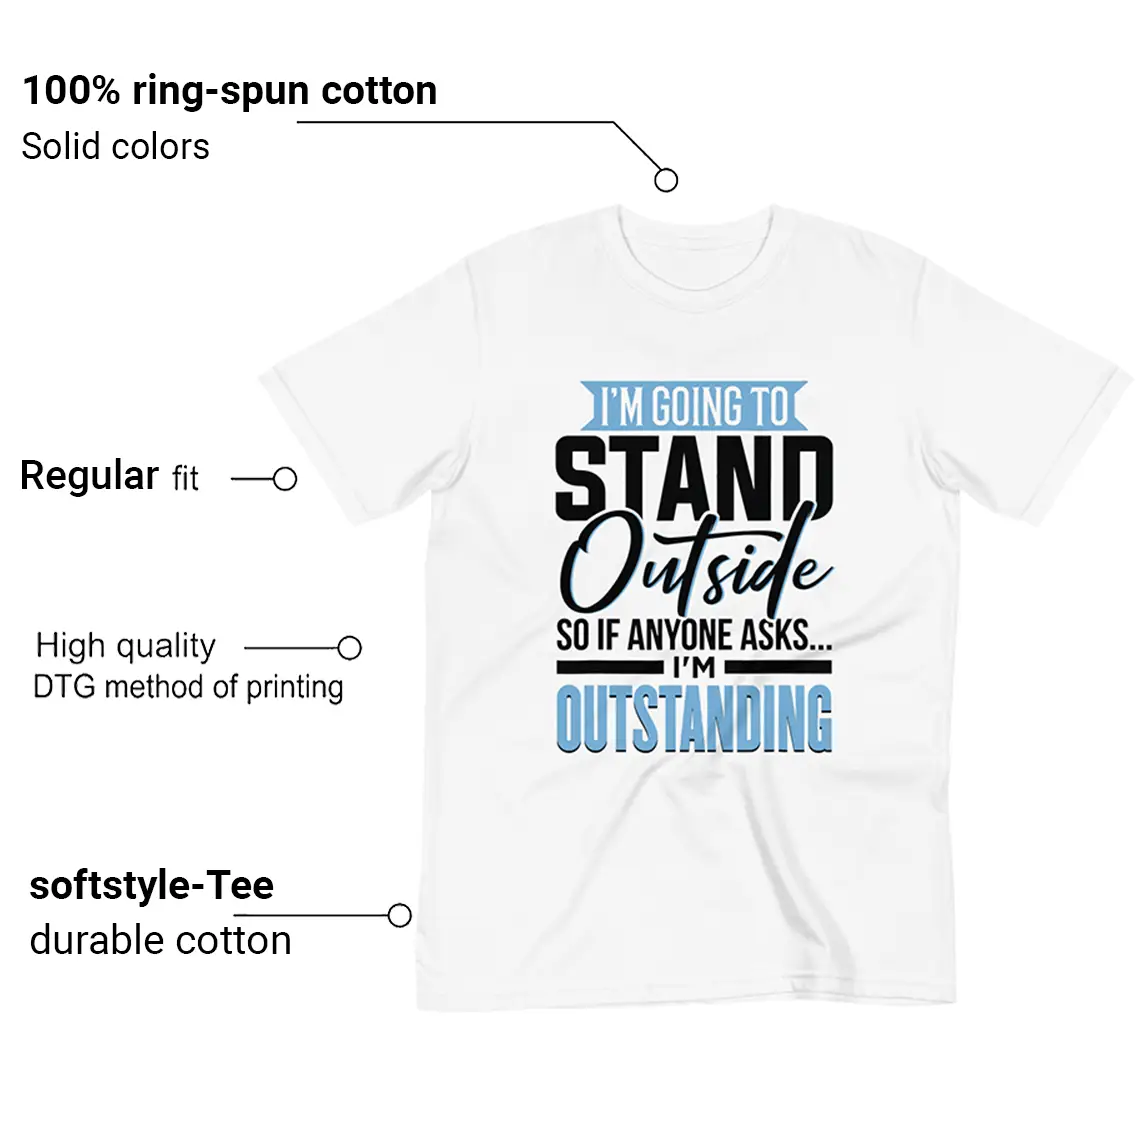 Jordan 1 UNC Toe T-shirt - Funny Outstanding Graphic Features